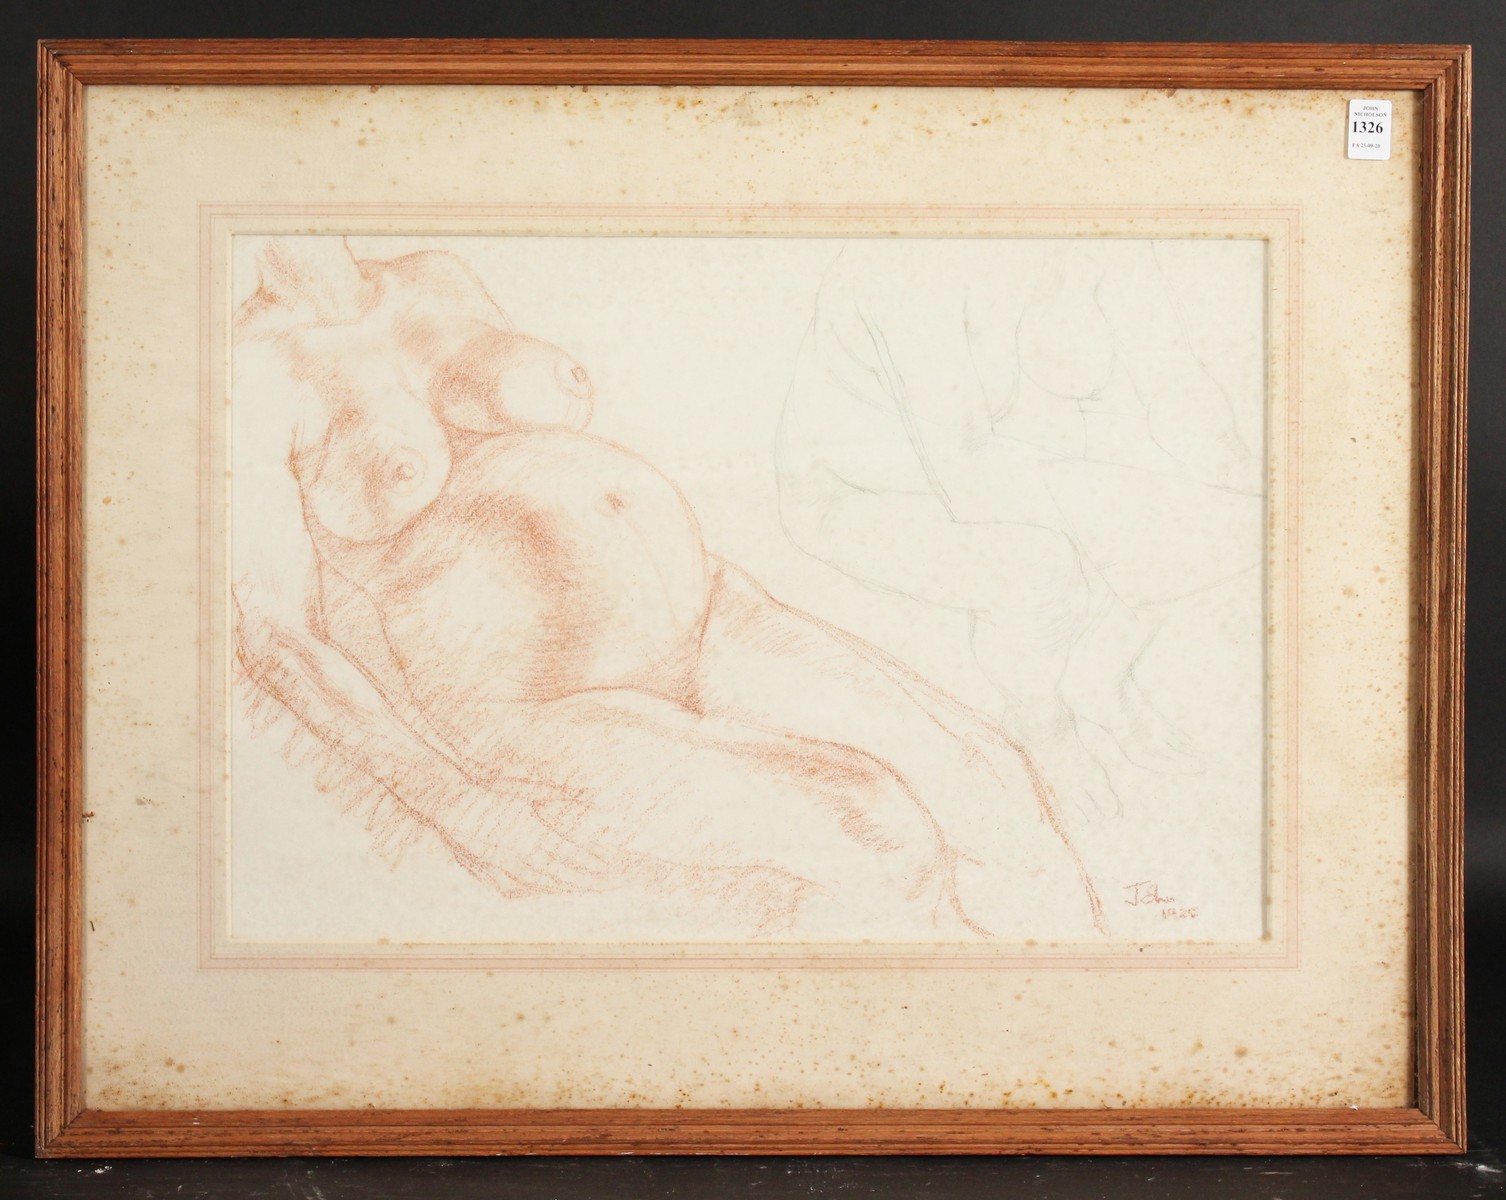 A Chalk & Pencil Study of Pregnant Women Signed 'John' and Dated 1928. 14" x 21". - Image 2 of 4